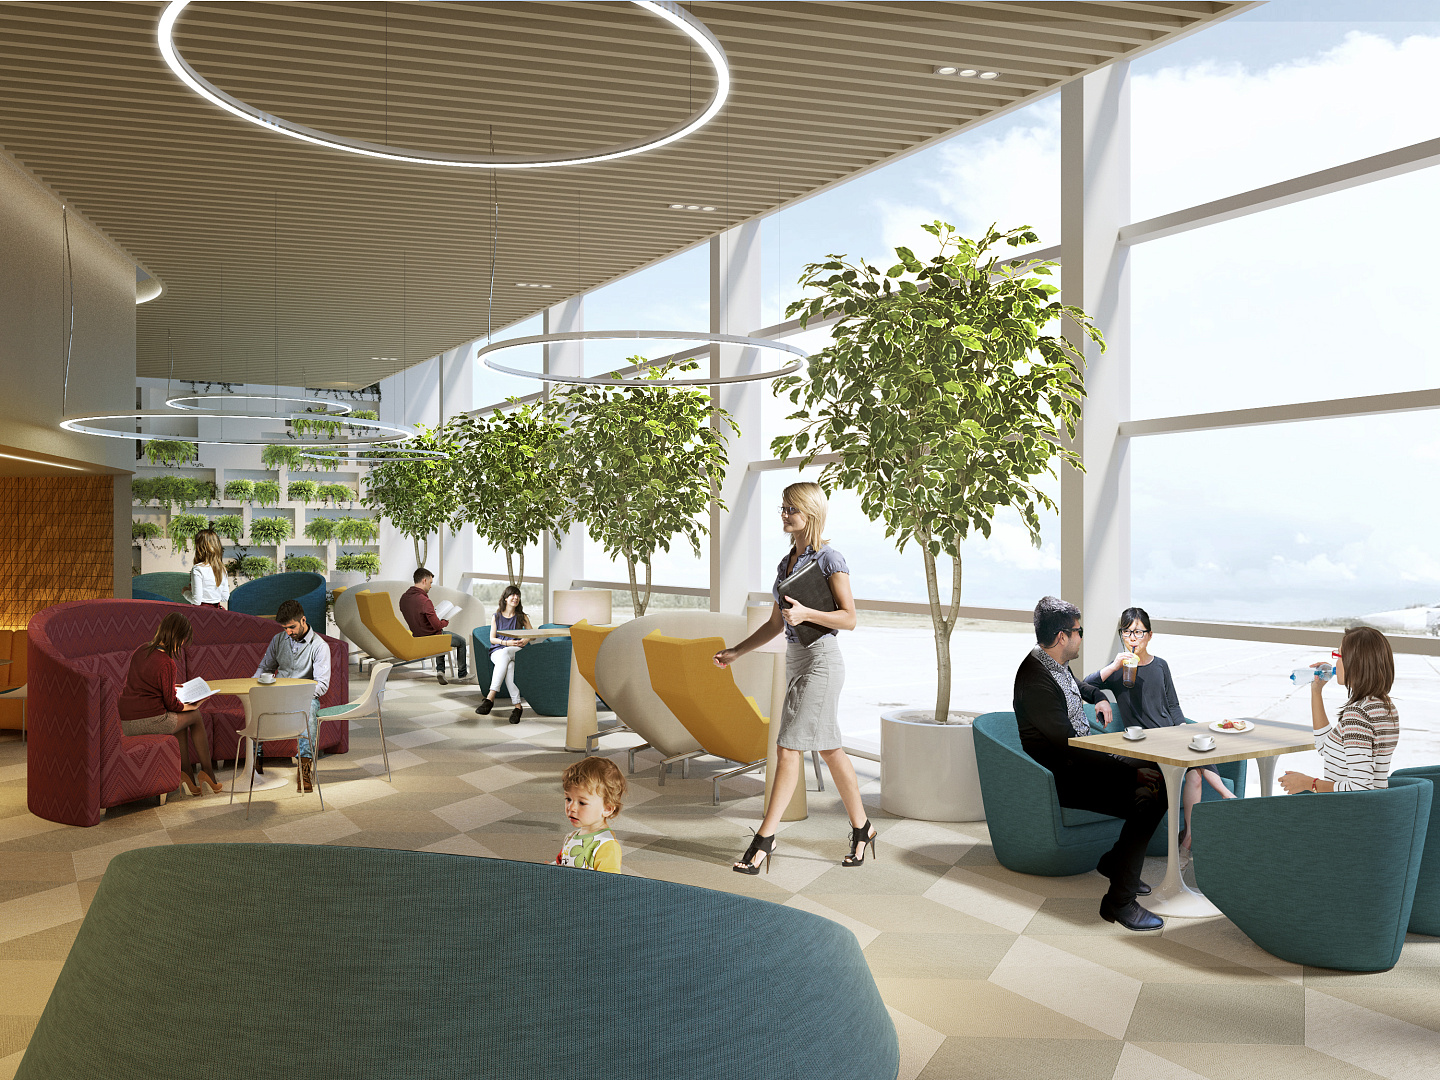 Airport Interior Competition Concept by PROJECT architectural bureau